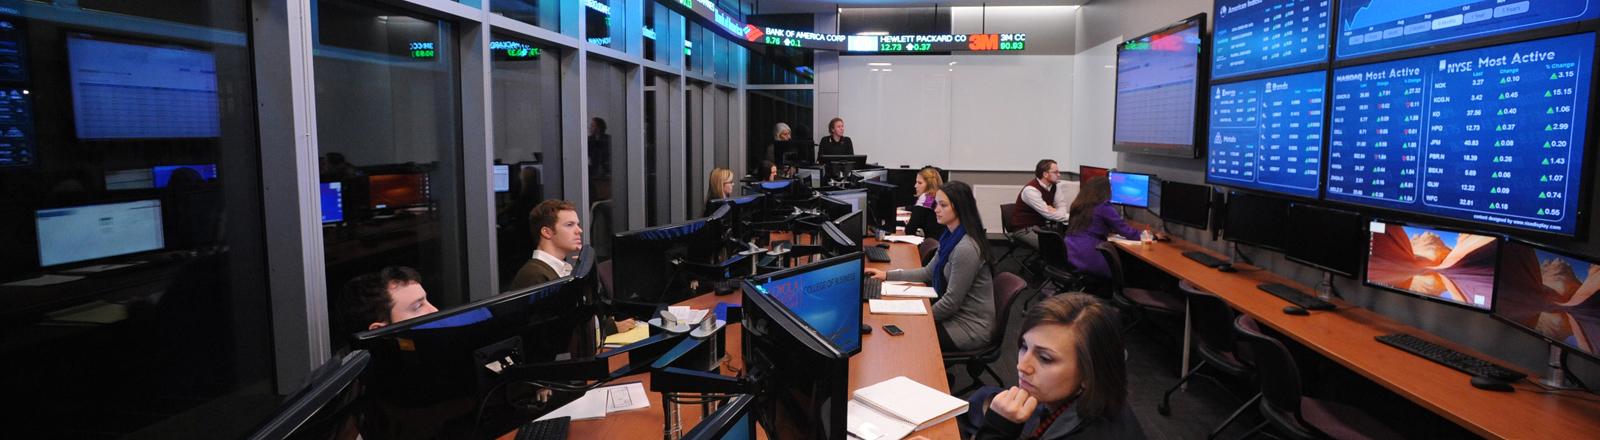 Ayala Stock Trading Room - College of Business - Loyola University New Orleans